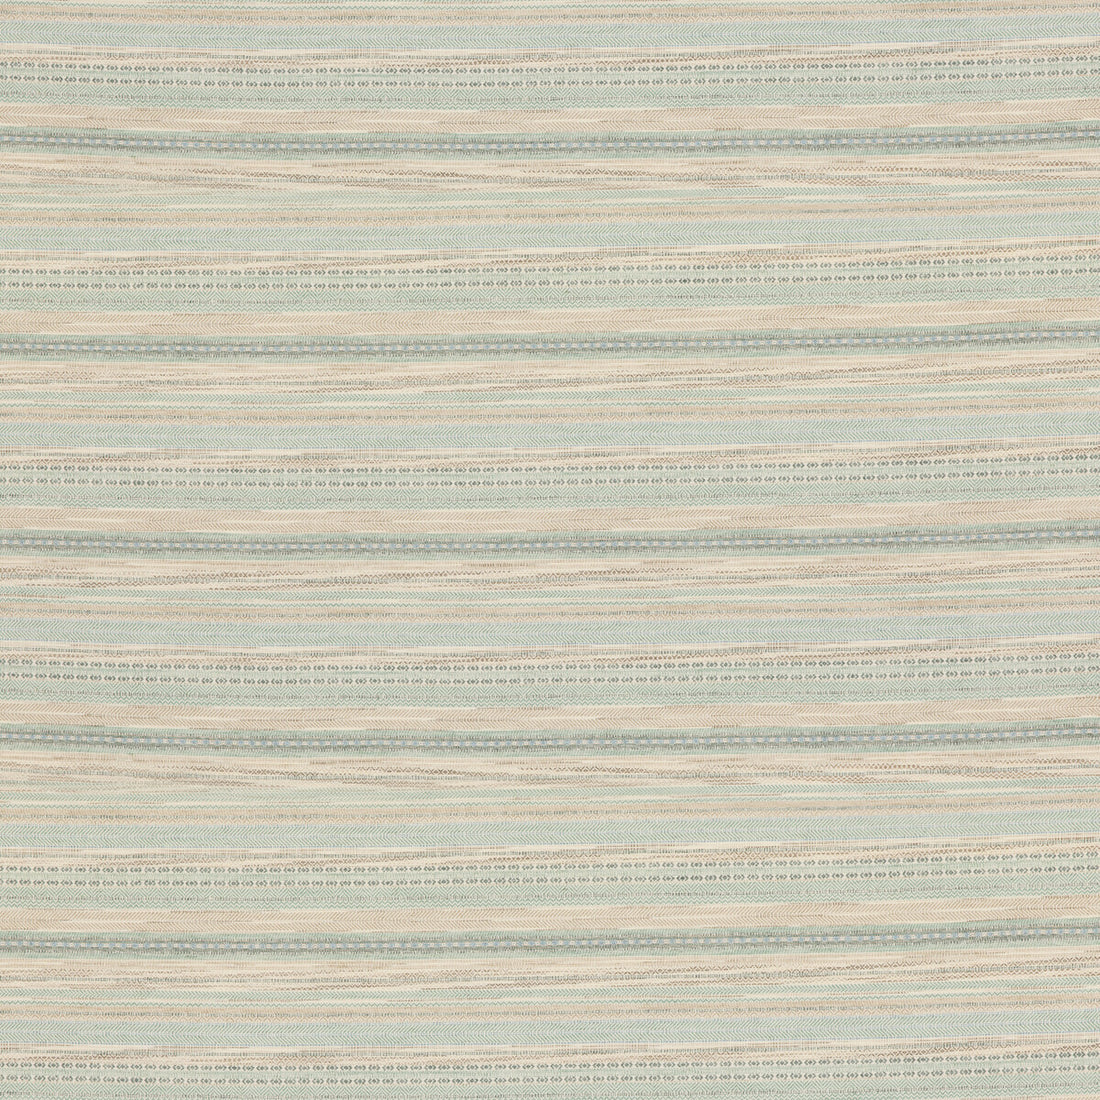 Fairfax fabric in aqua color - pattern BF11036.6.0 - by G P &amp; J Baker in the Burford Weaves collection